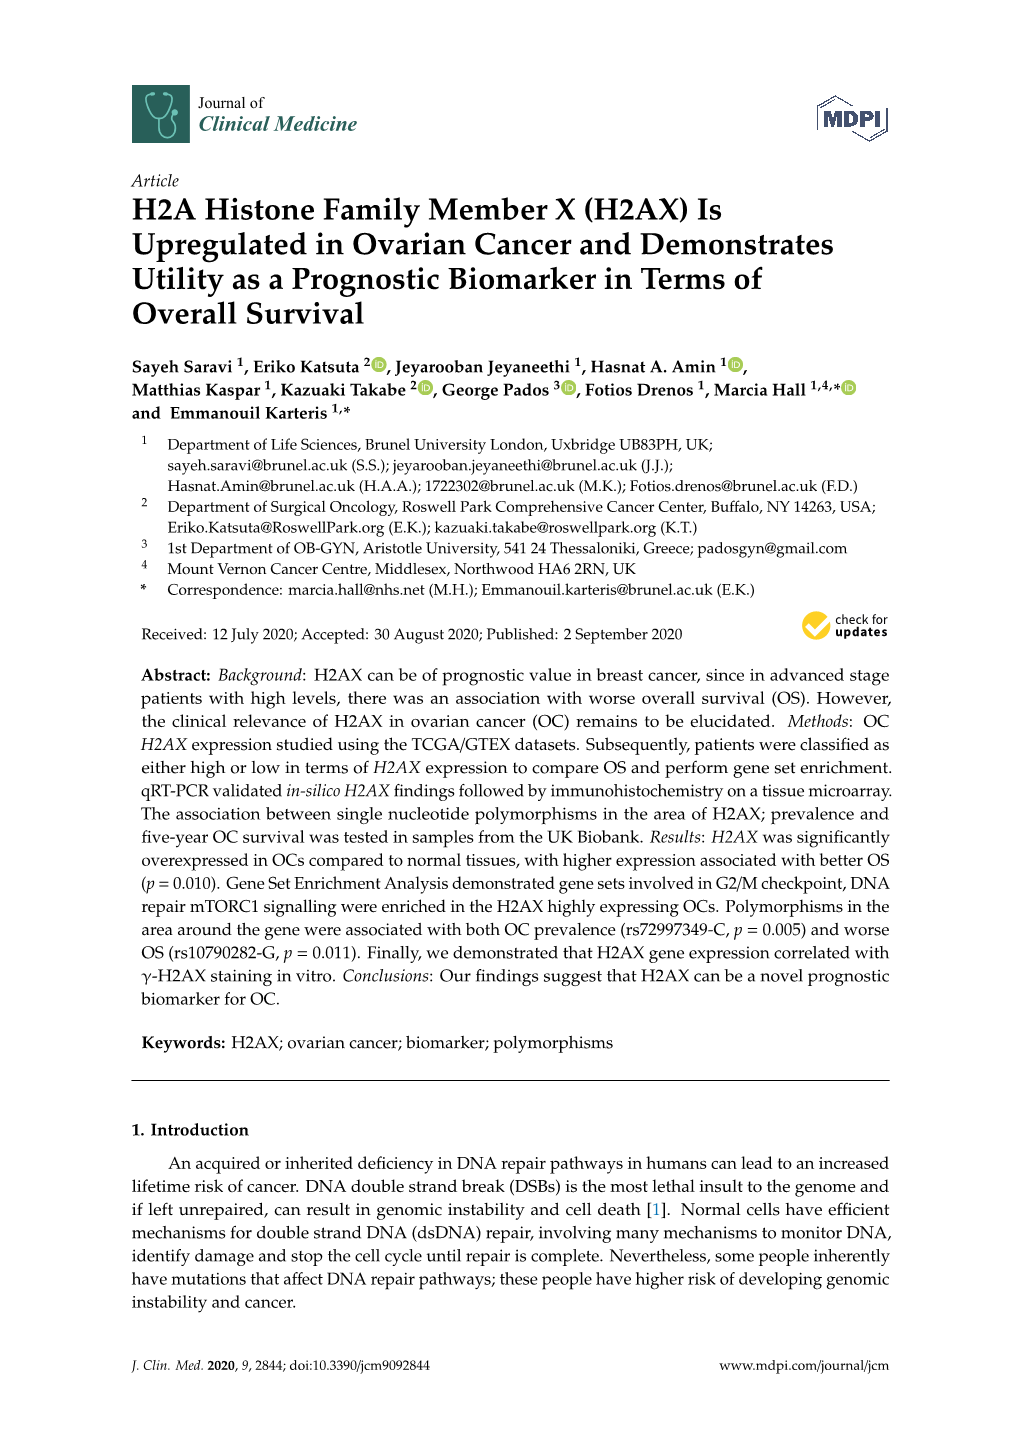 (H2AX) Is Upregulated in Ovarian Cancer and Demonstrates Utility As a Prognostic Biomarker in Terms of Overall Survival